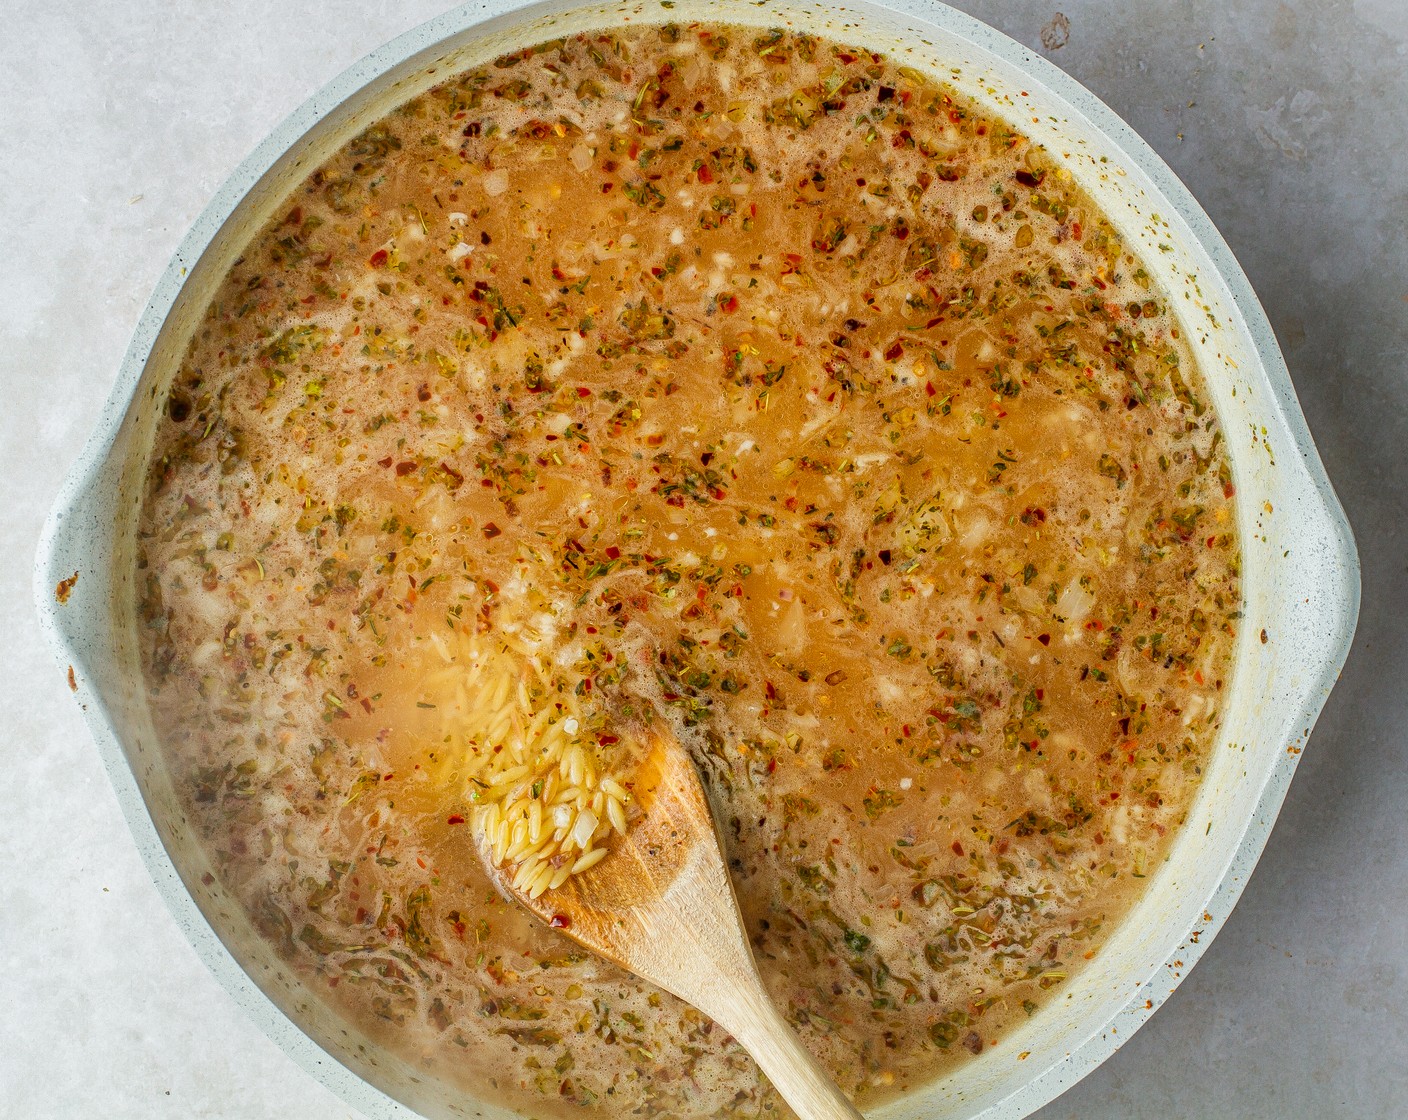 step 5 Stir Unsalted Butter (2 Tbsp), Kosher Salt (1 tsp), Ground Black Pepper (1/2 tsp), Italian Seasoning (1 tsp), Crushed Red Pepper Flakes (1 tsp), Vegetable Stock (4 cups), and the juice from Lemon (1). Increase heat to high and bring the liquid to a boil.